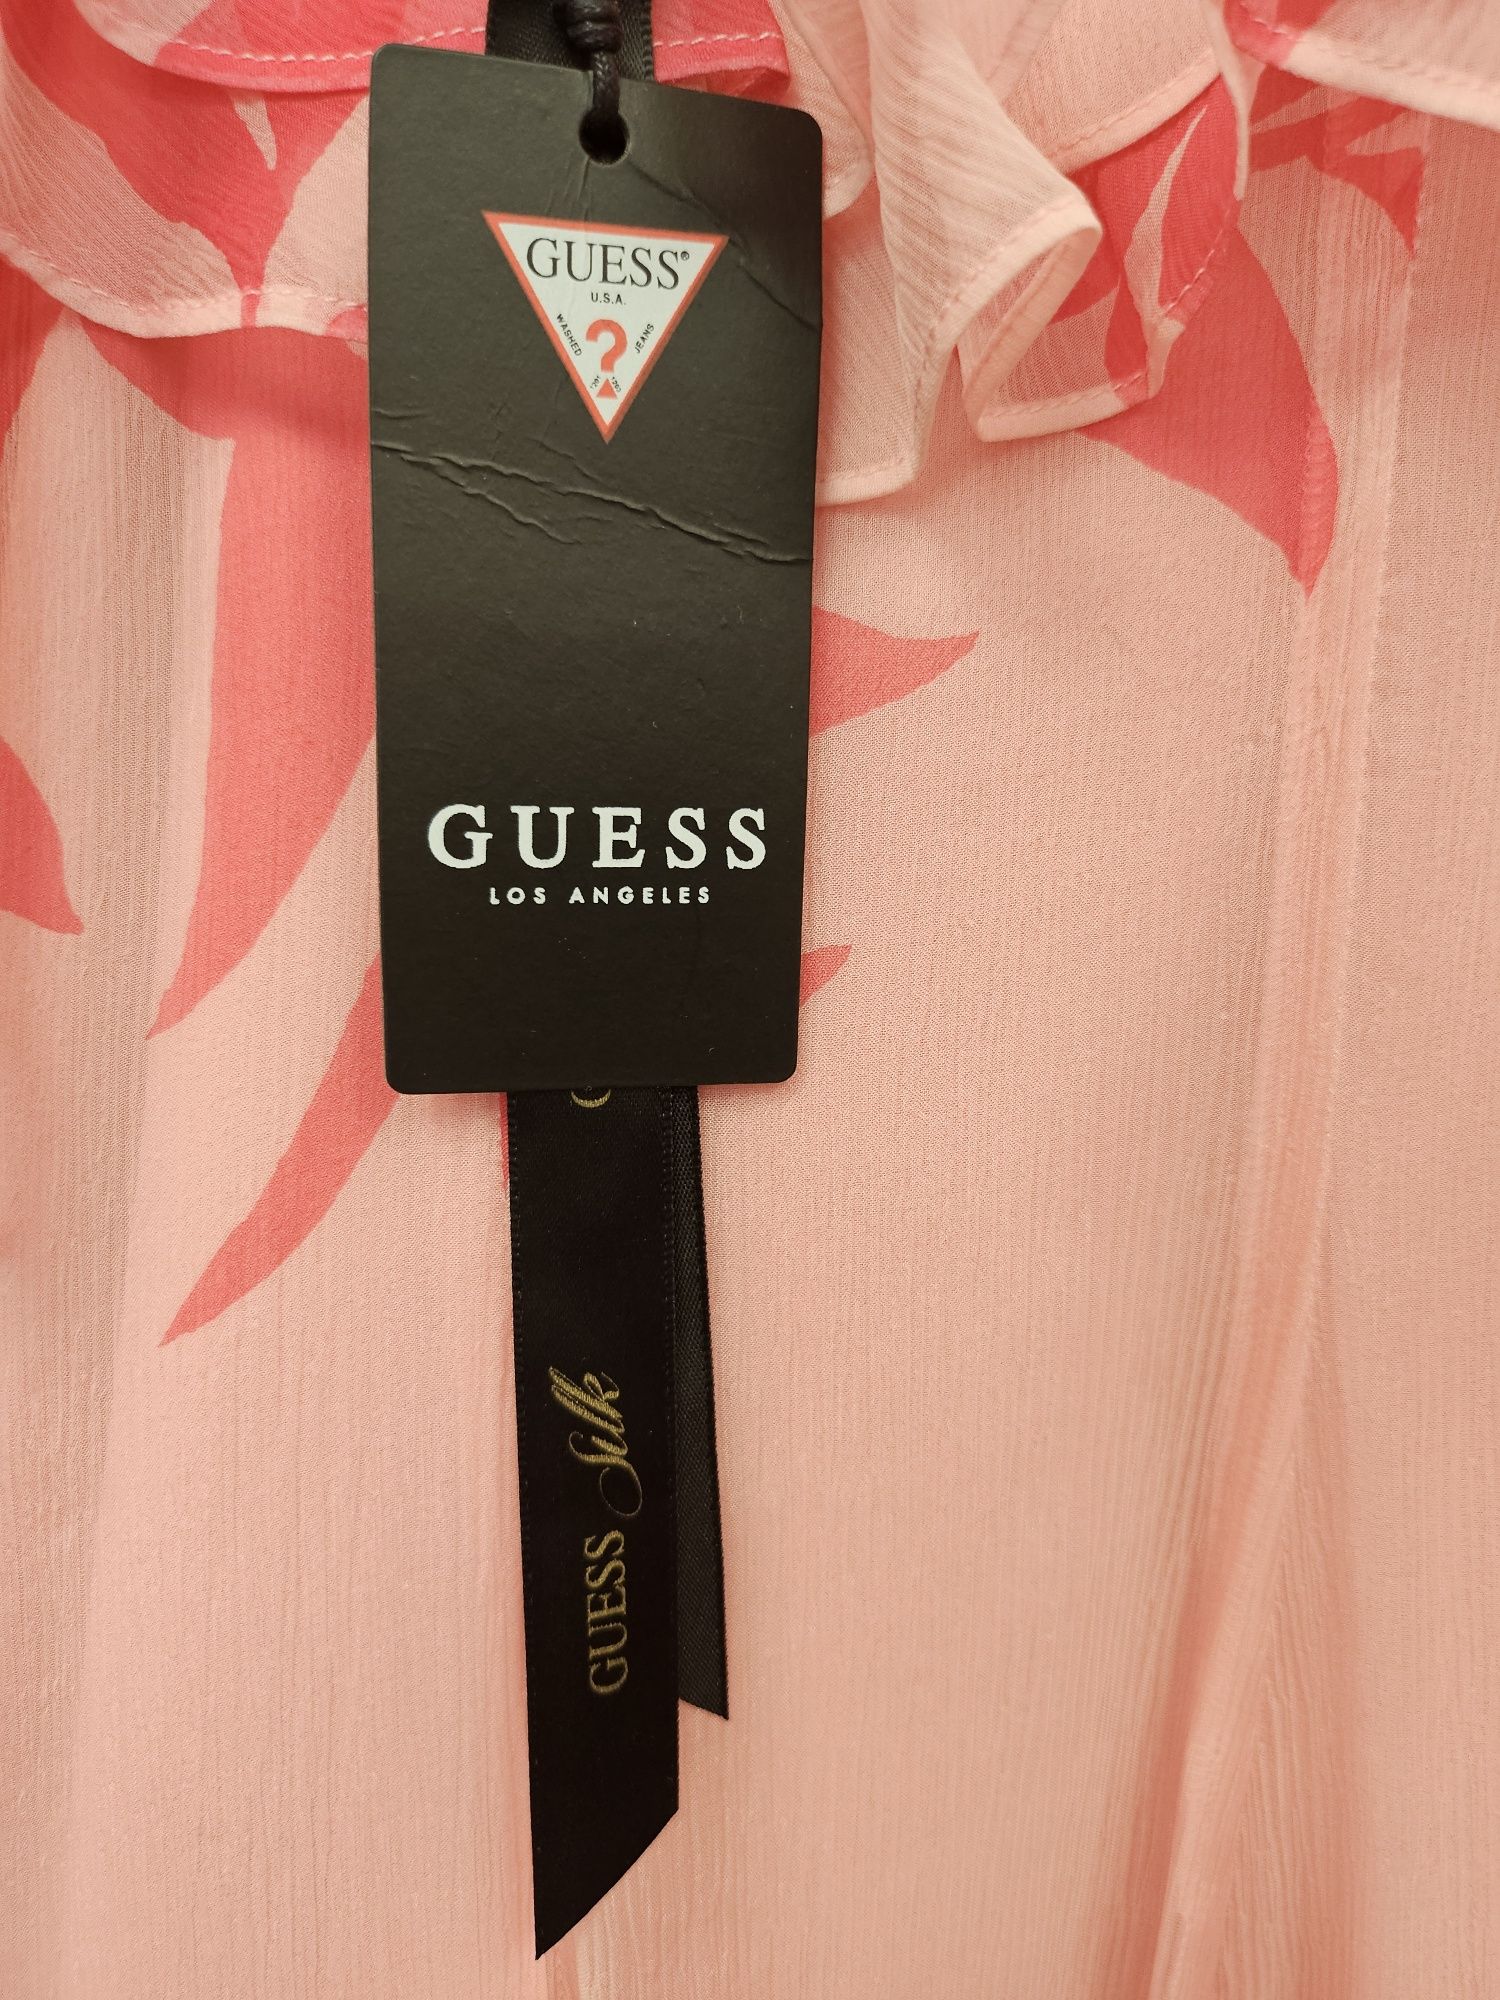 Dress by Guess pink